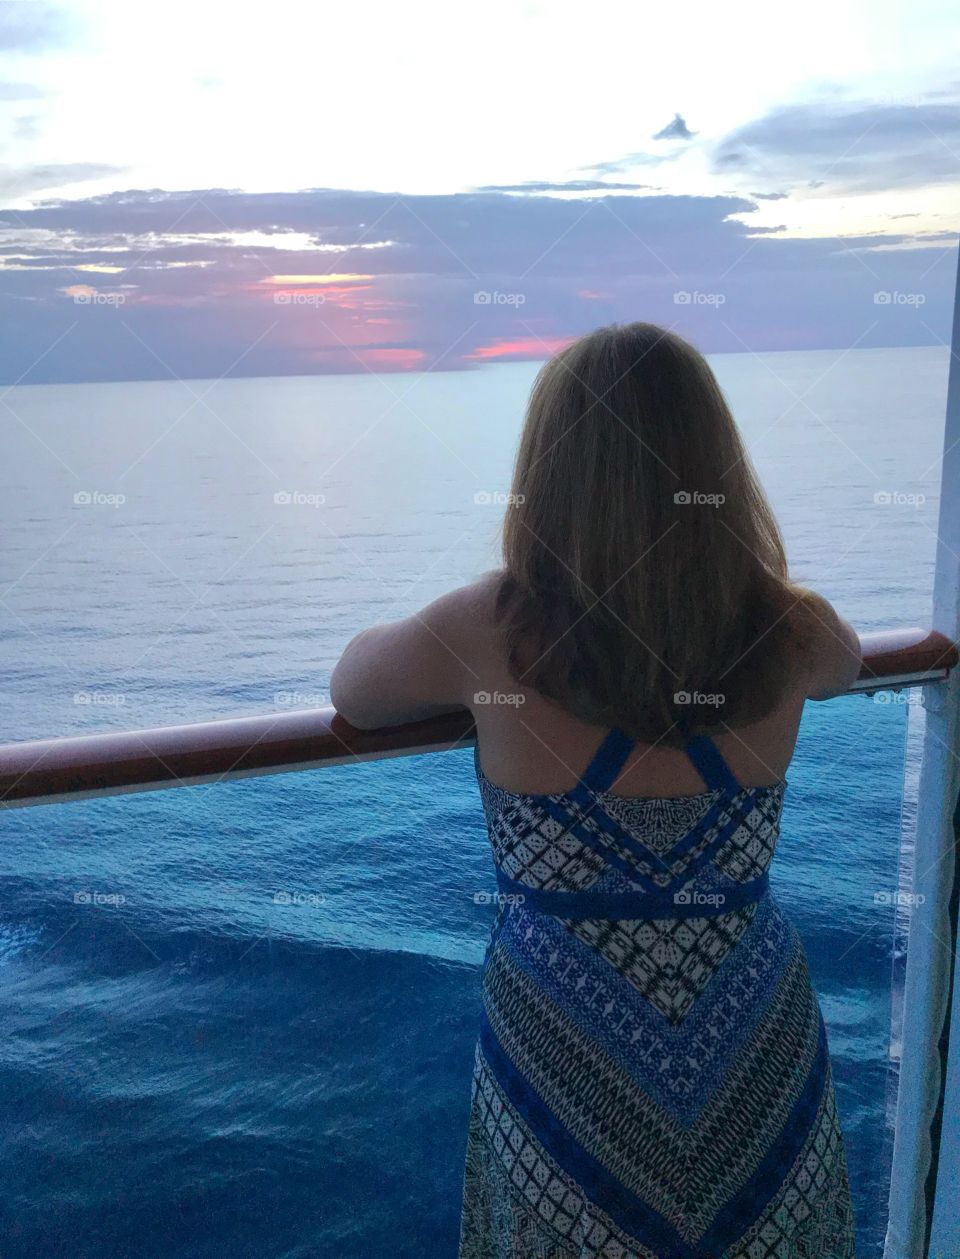 Sunset over the Caribbean 